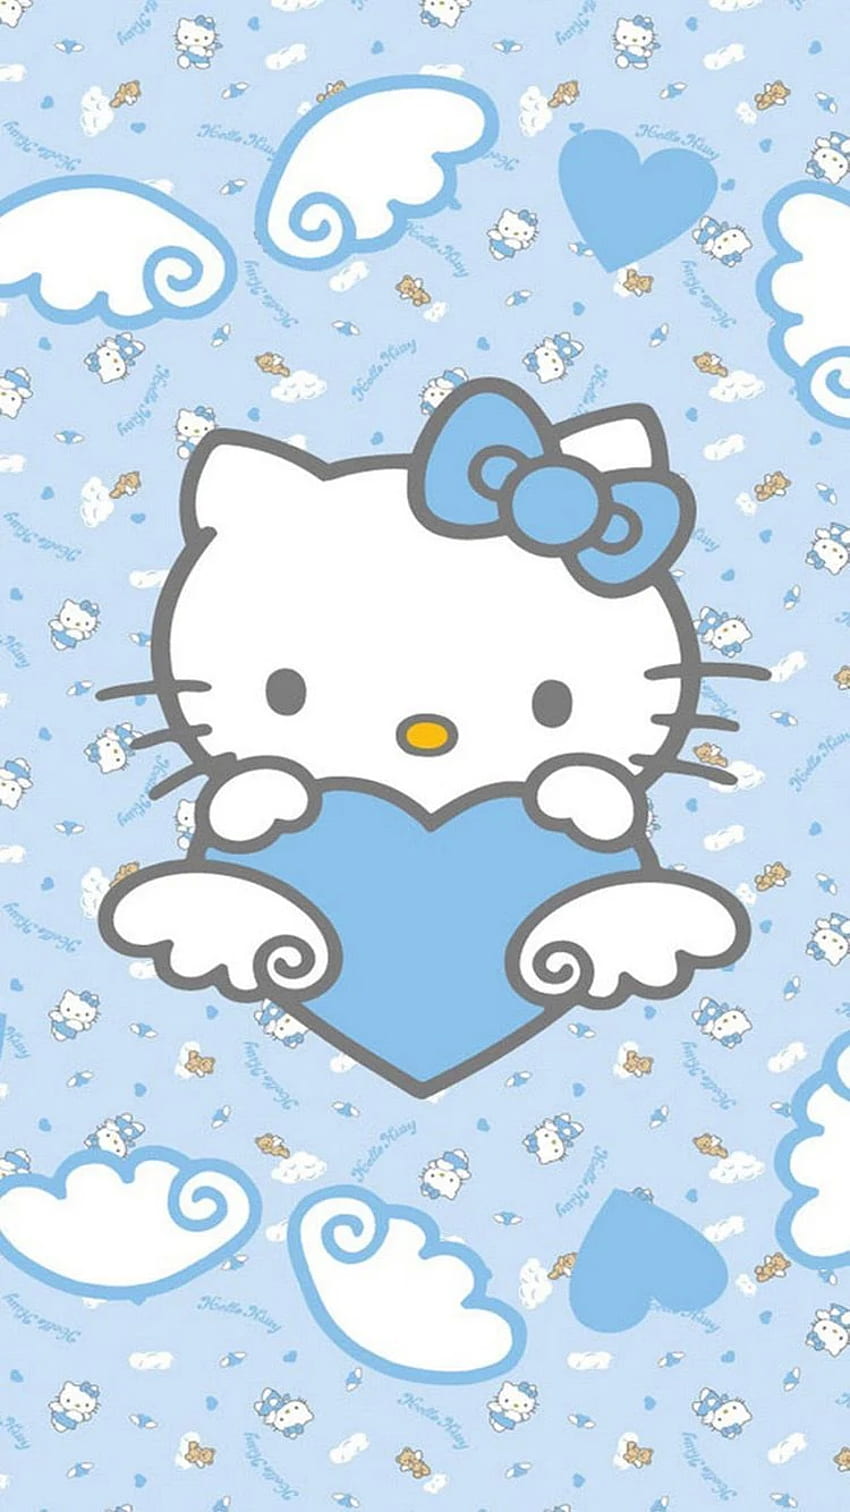 Blue Hello Kitty For iPhone 6. ハローキティ , ブルーハローキティ , ハローキティ HD電話の壁紙